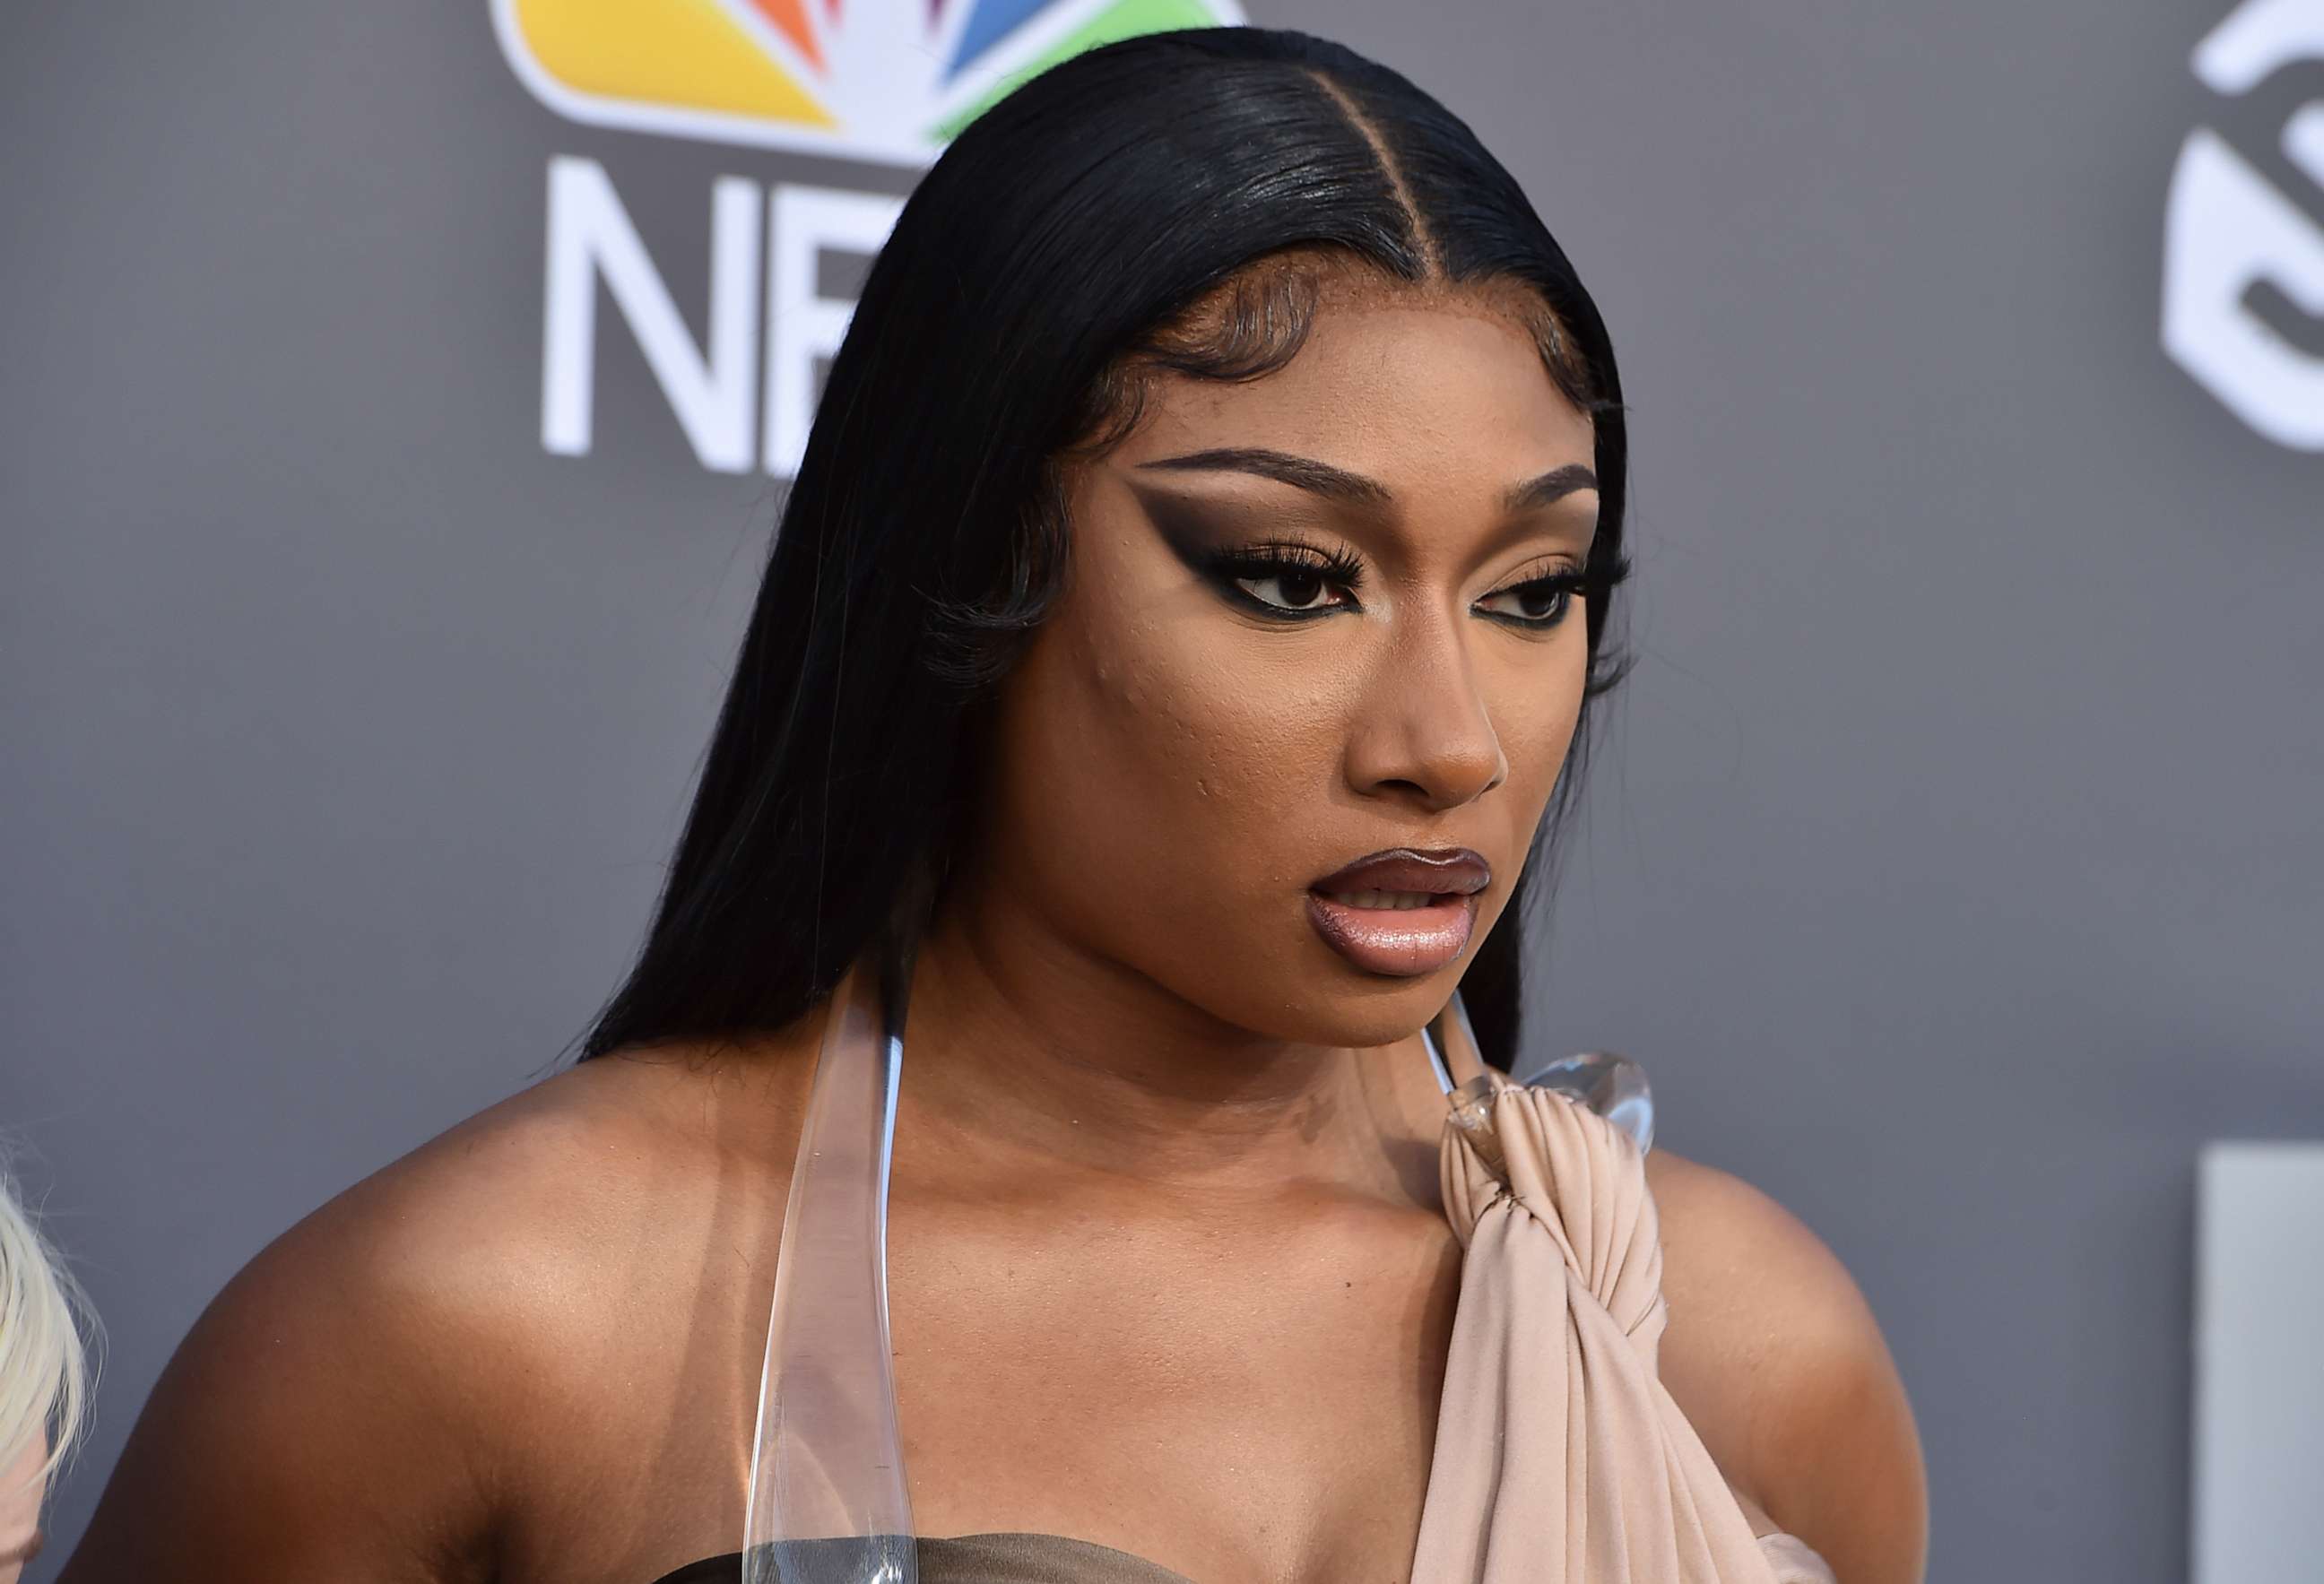 PHOTO: Megan Thee Stallion arrives at the Billboard Music Awards on May 15, 2022, at the MGM Grand Garden Arena in Las Vegas.